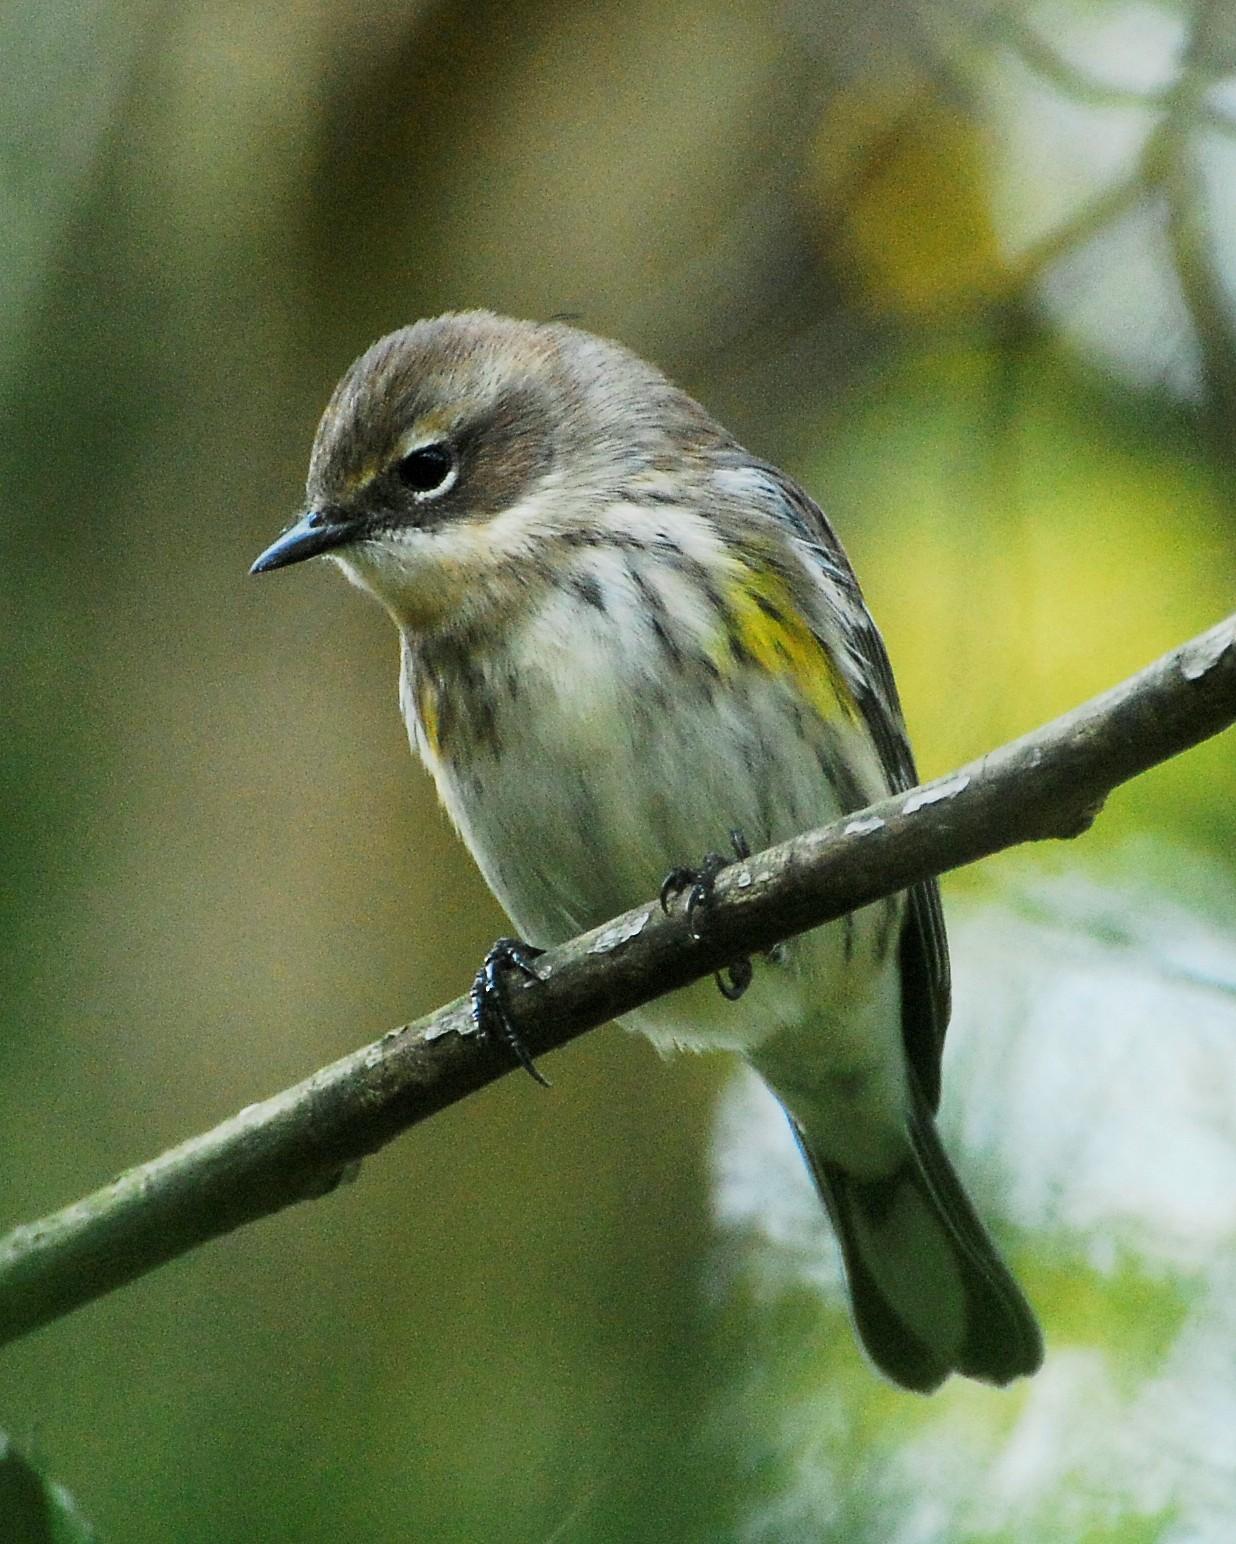 Yellow-rumped Warbler Photo by David Hollie